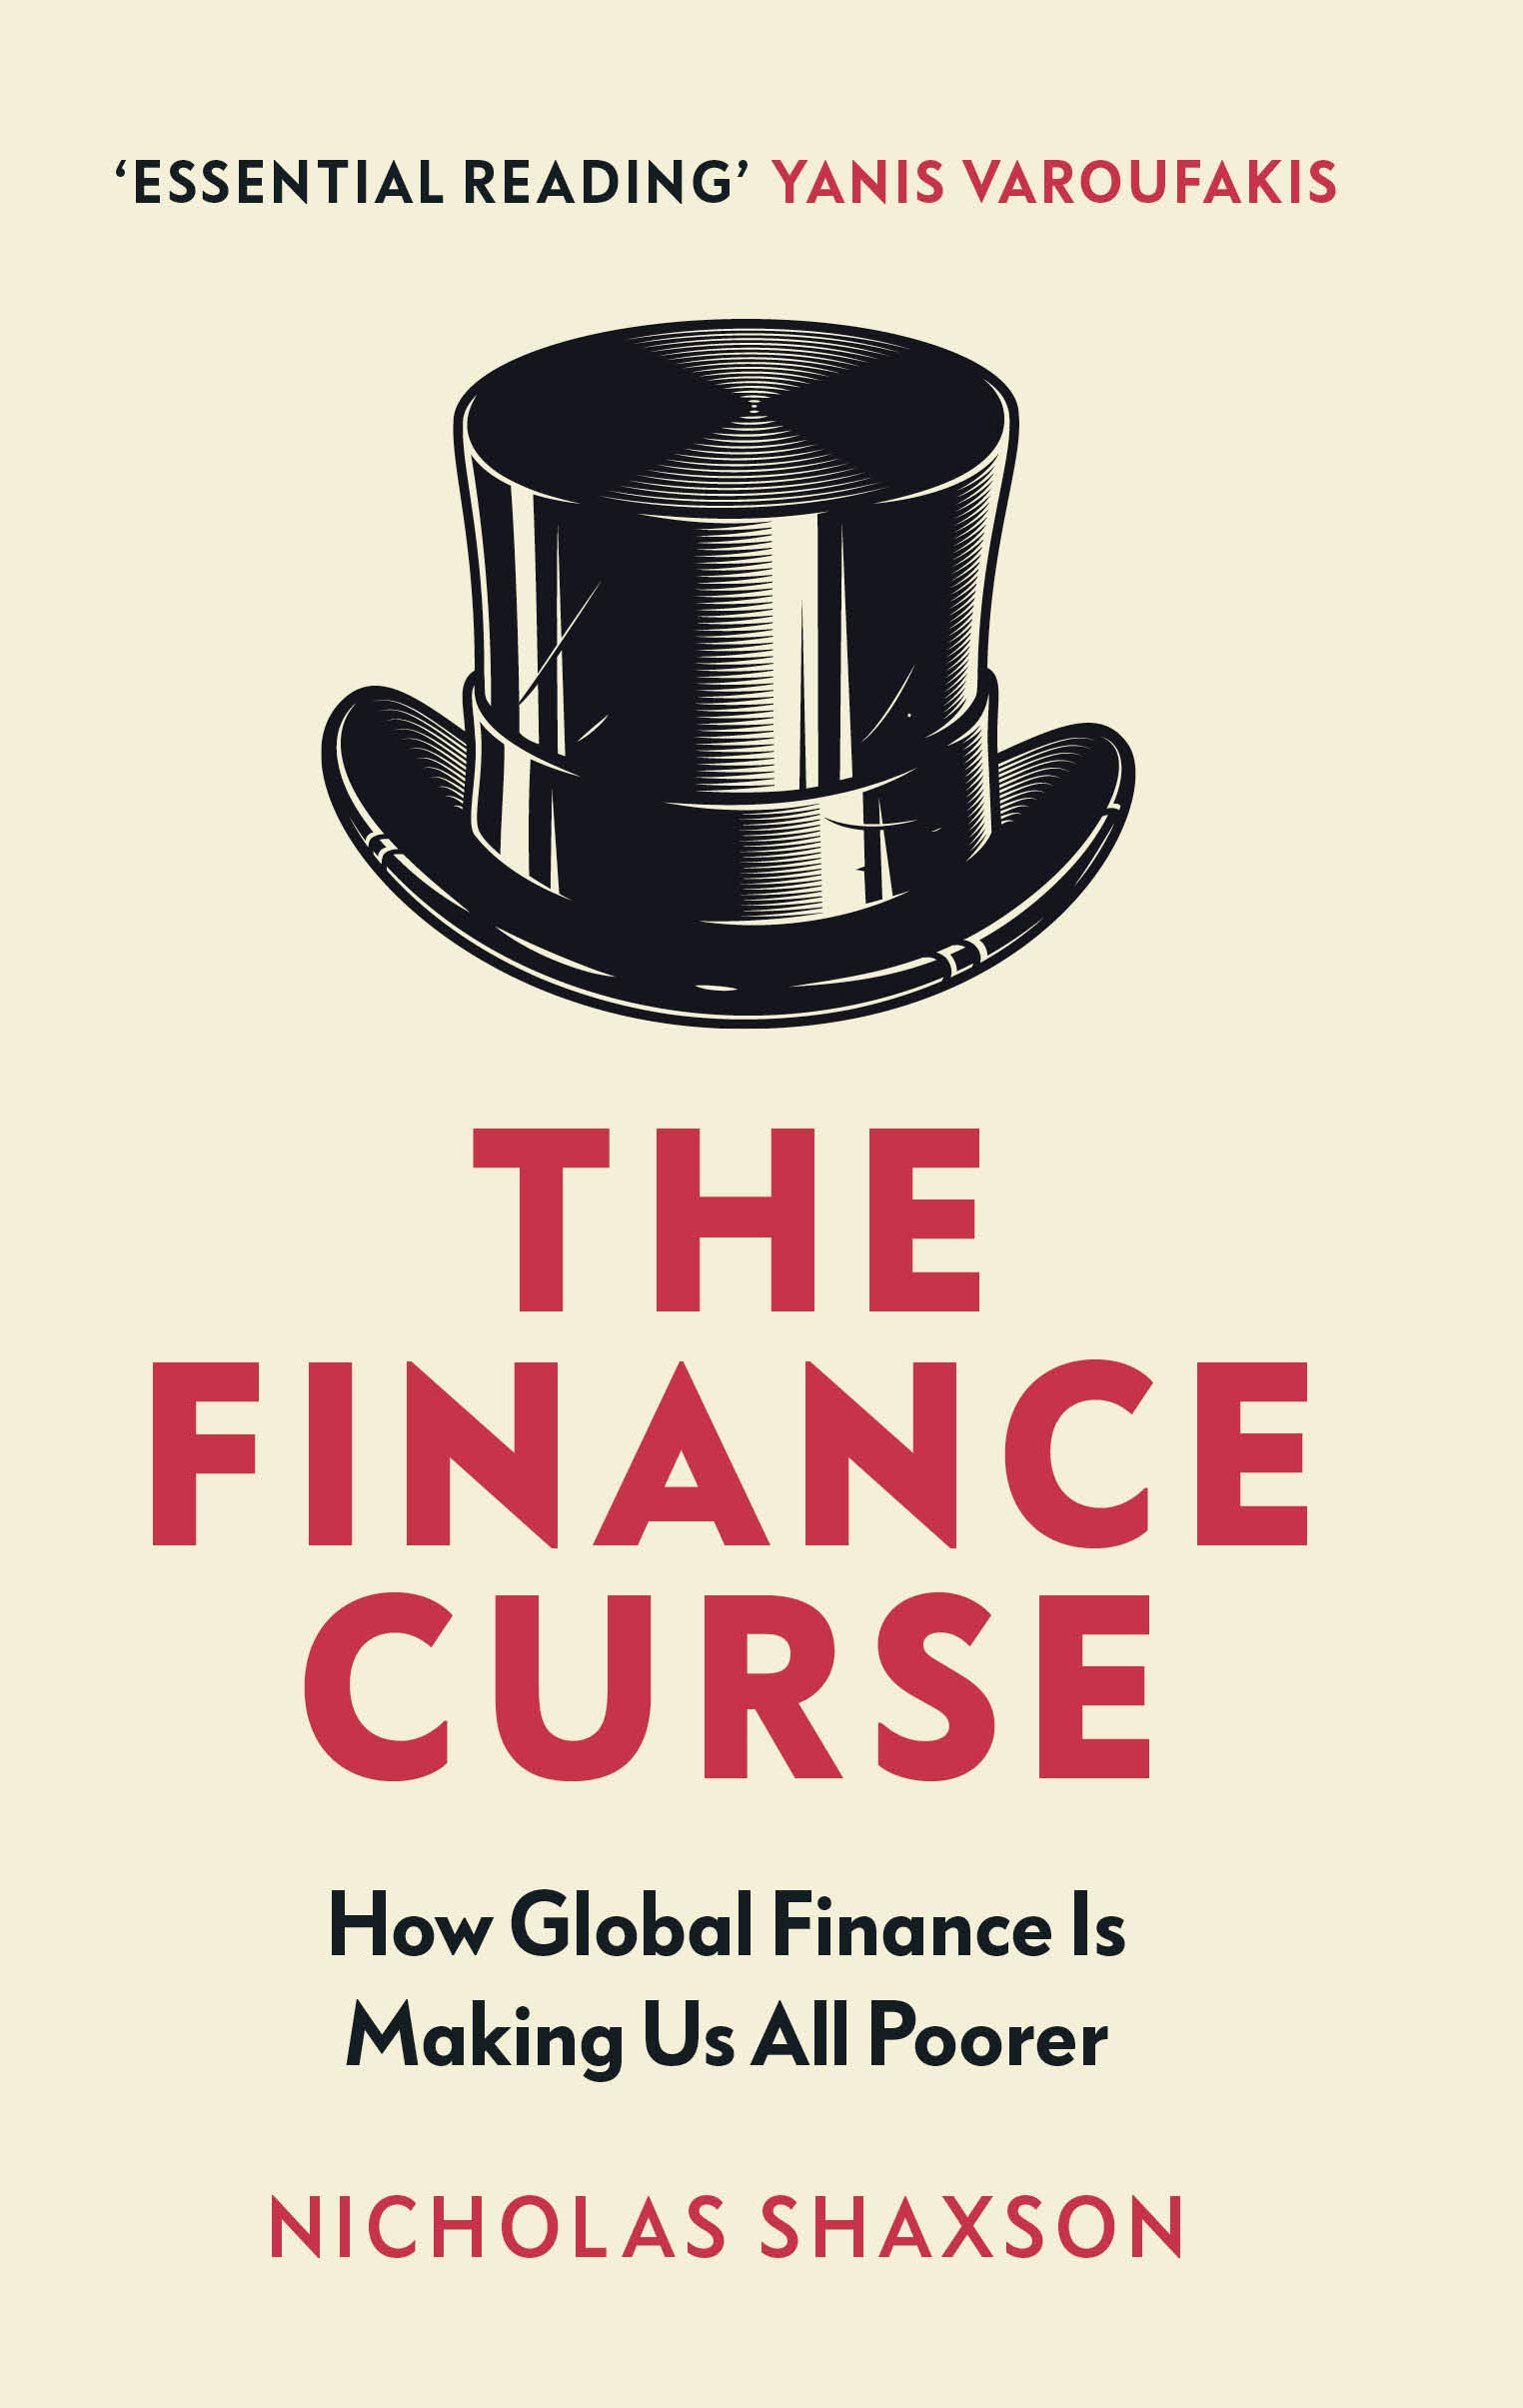 The finance course